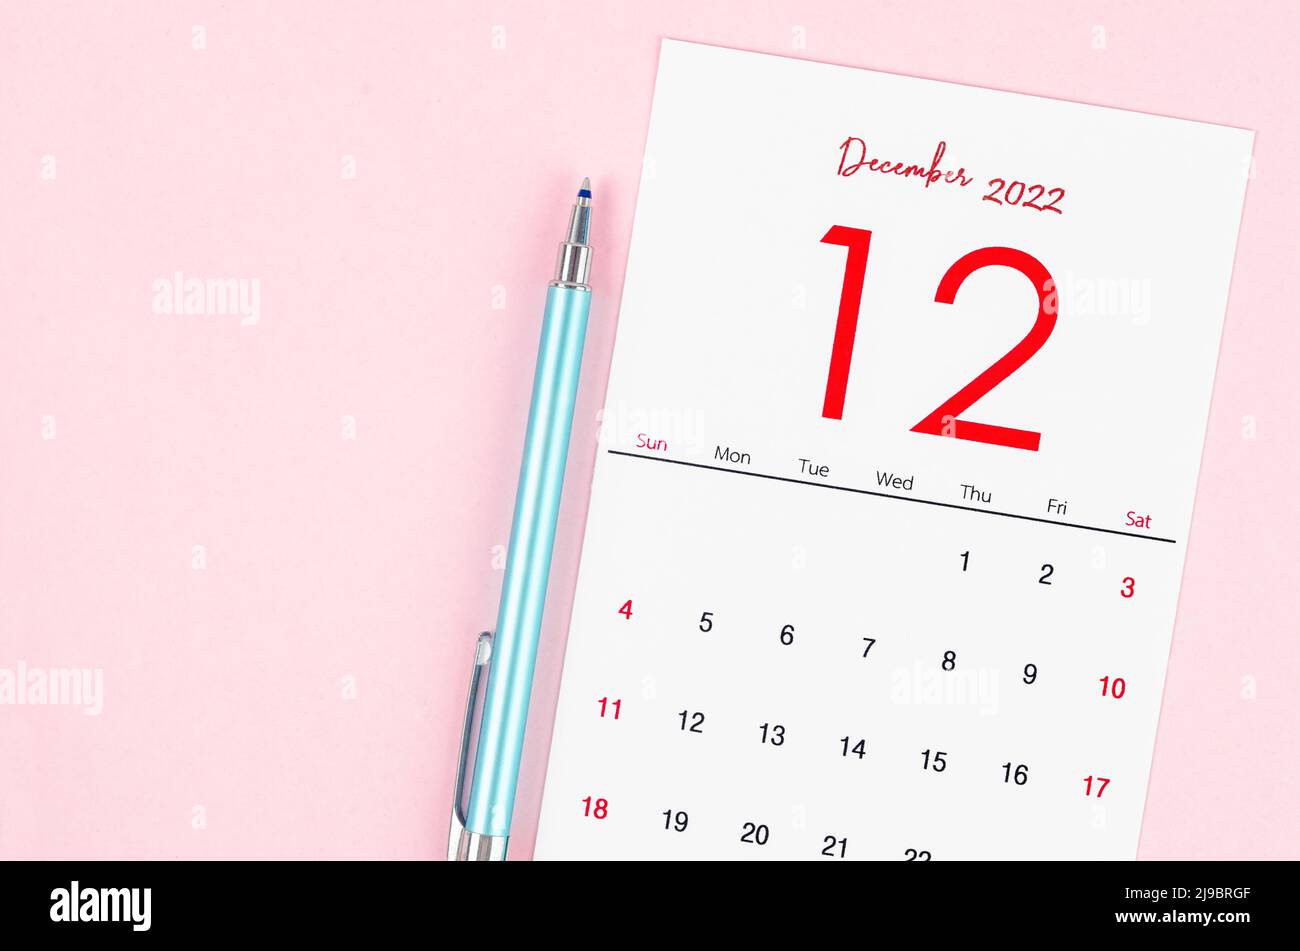 The December 2022 calendar with pen on pink background. Stock Photo